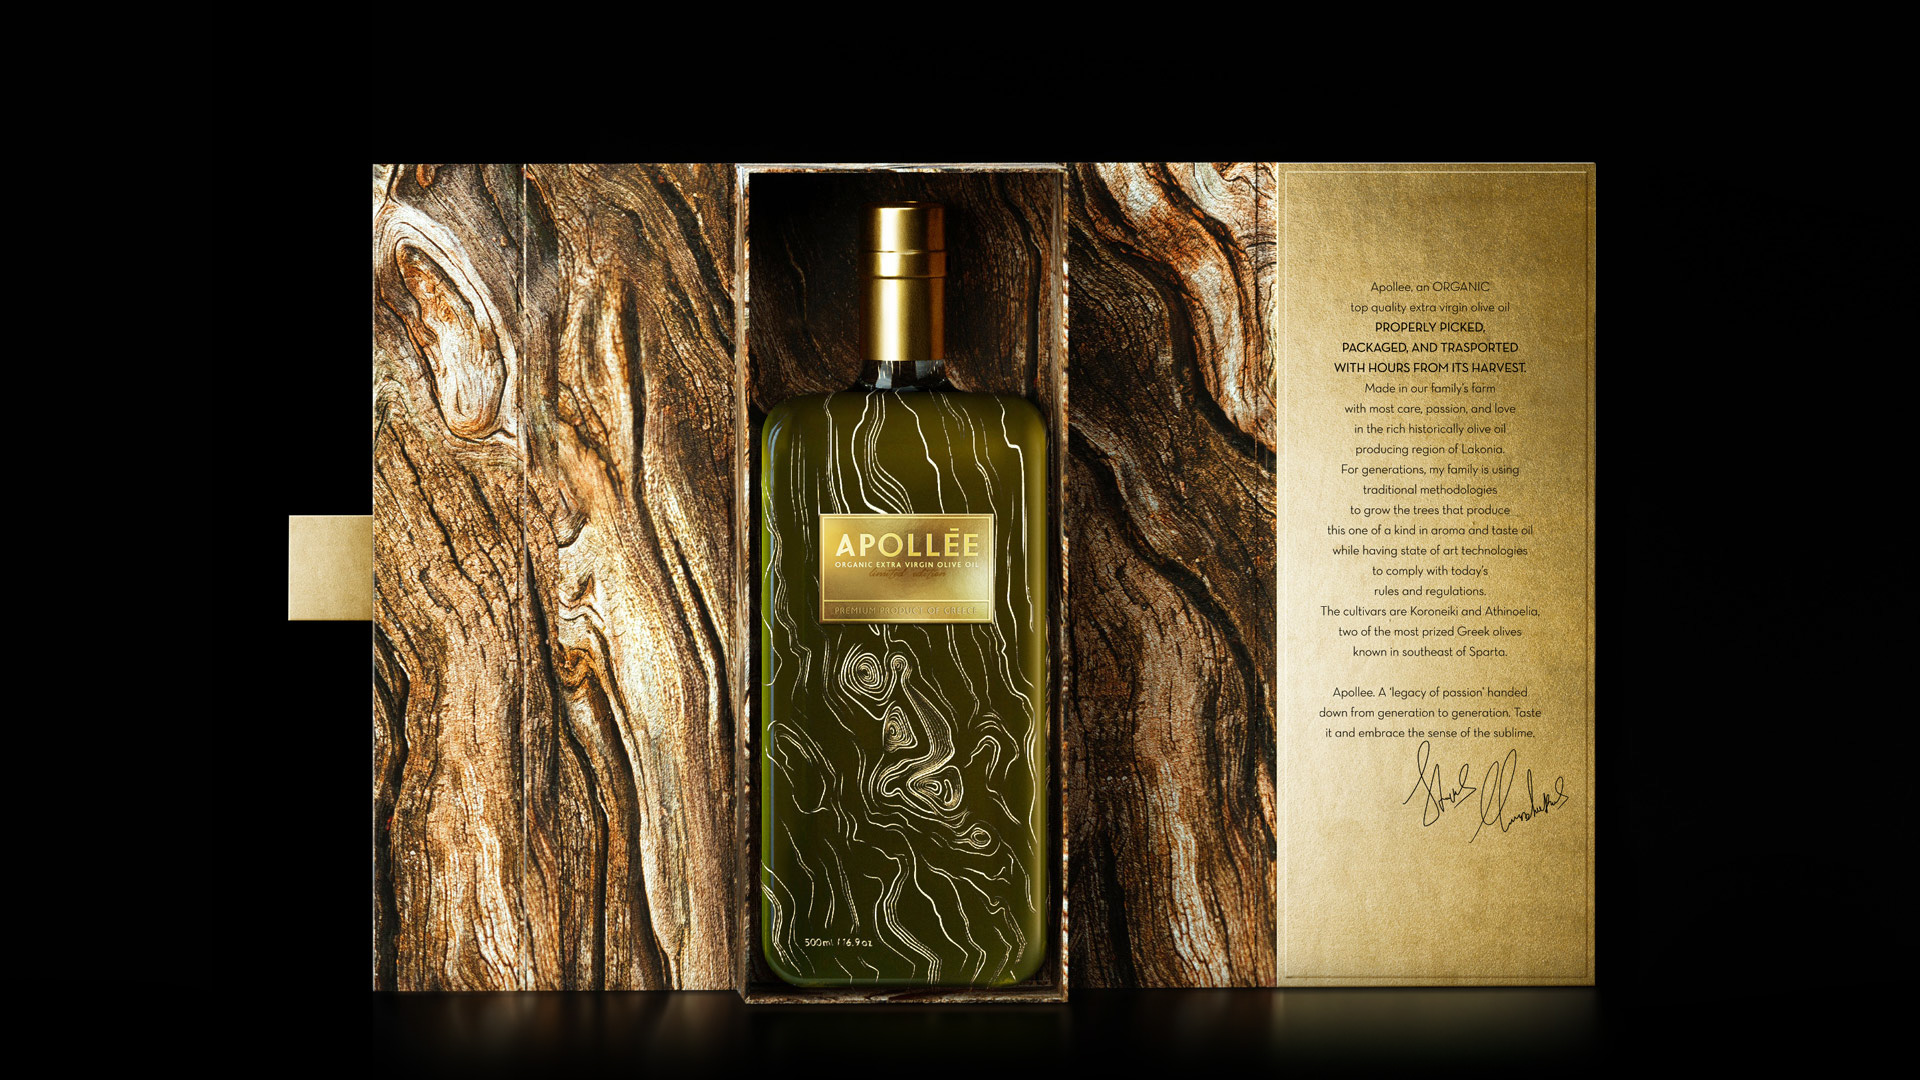 Apollee Olive Oil Branding And Packaging Design